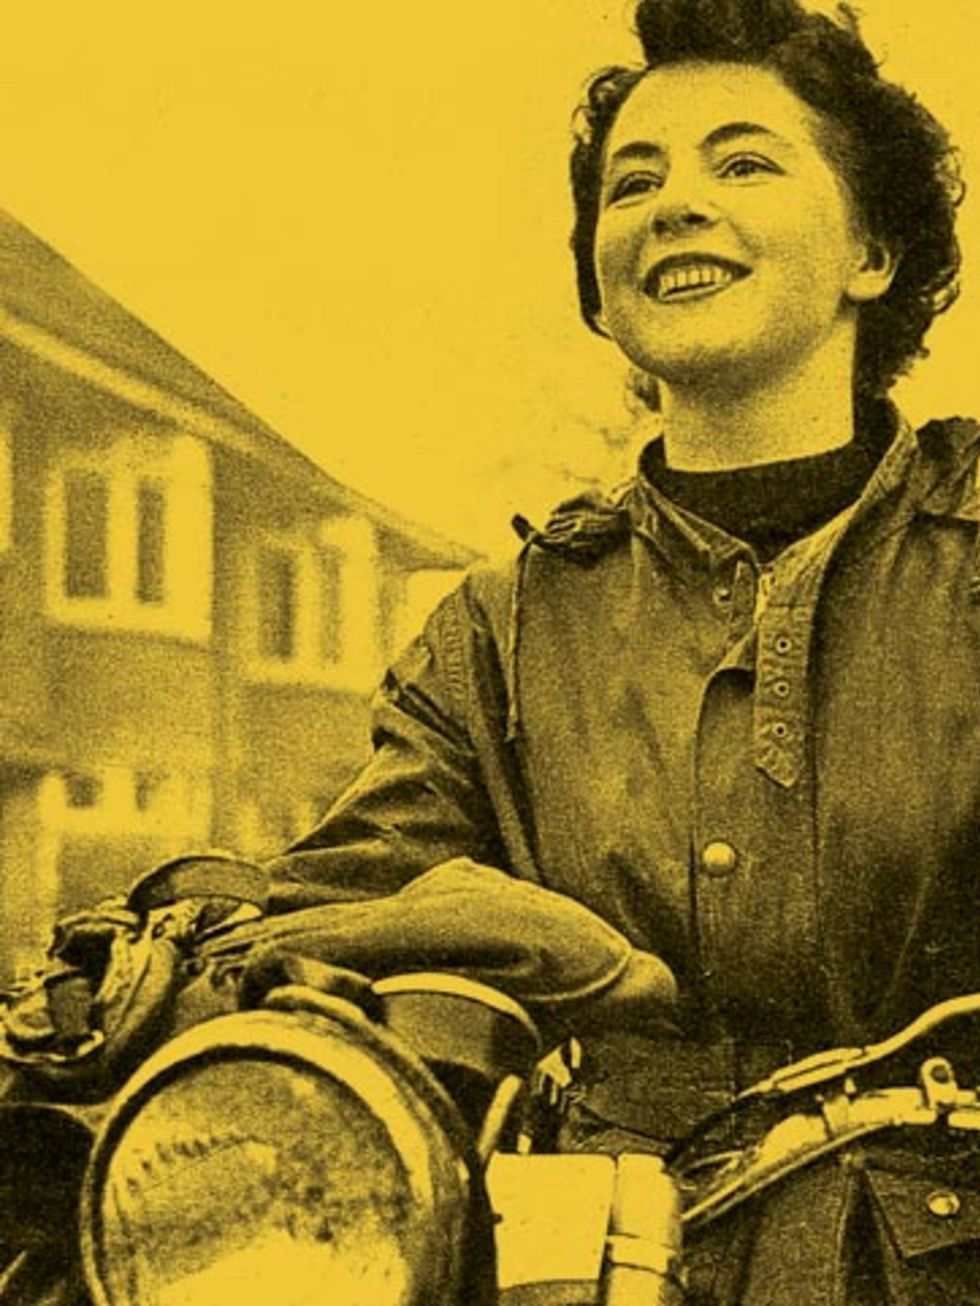 Sitting, Vintage clothing, Retro style, Laugh, Pleased, Machine, Classic, Motorcycle, Portrait, 